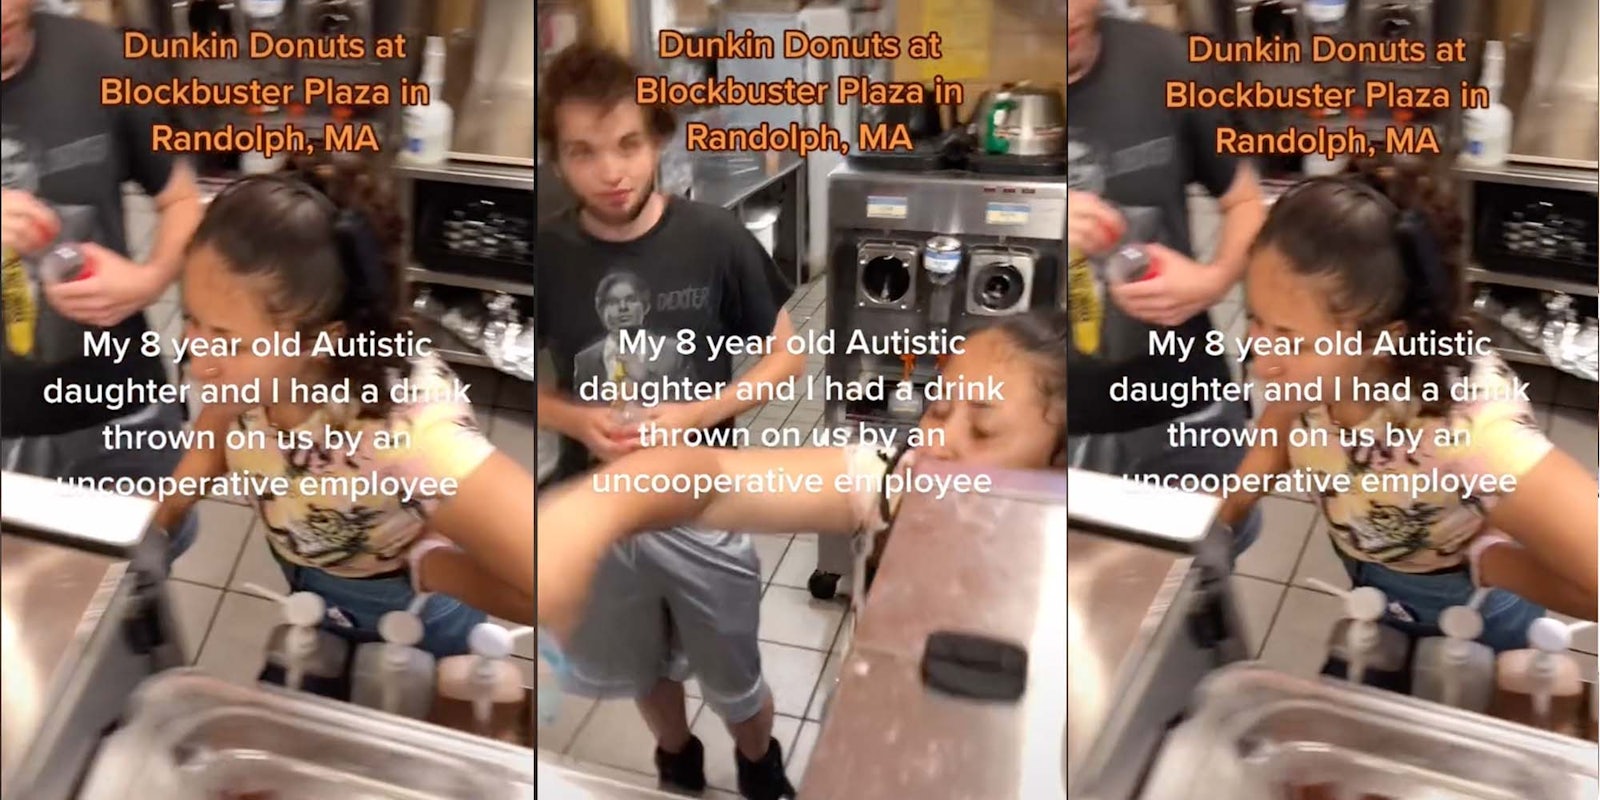 In a TikTok, a Dunkin Donuts employee is seen throwing a drink at a customer.